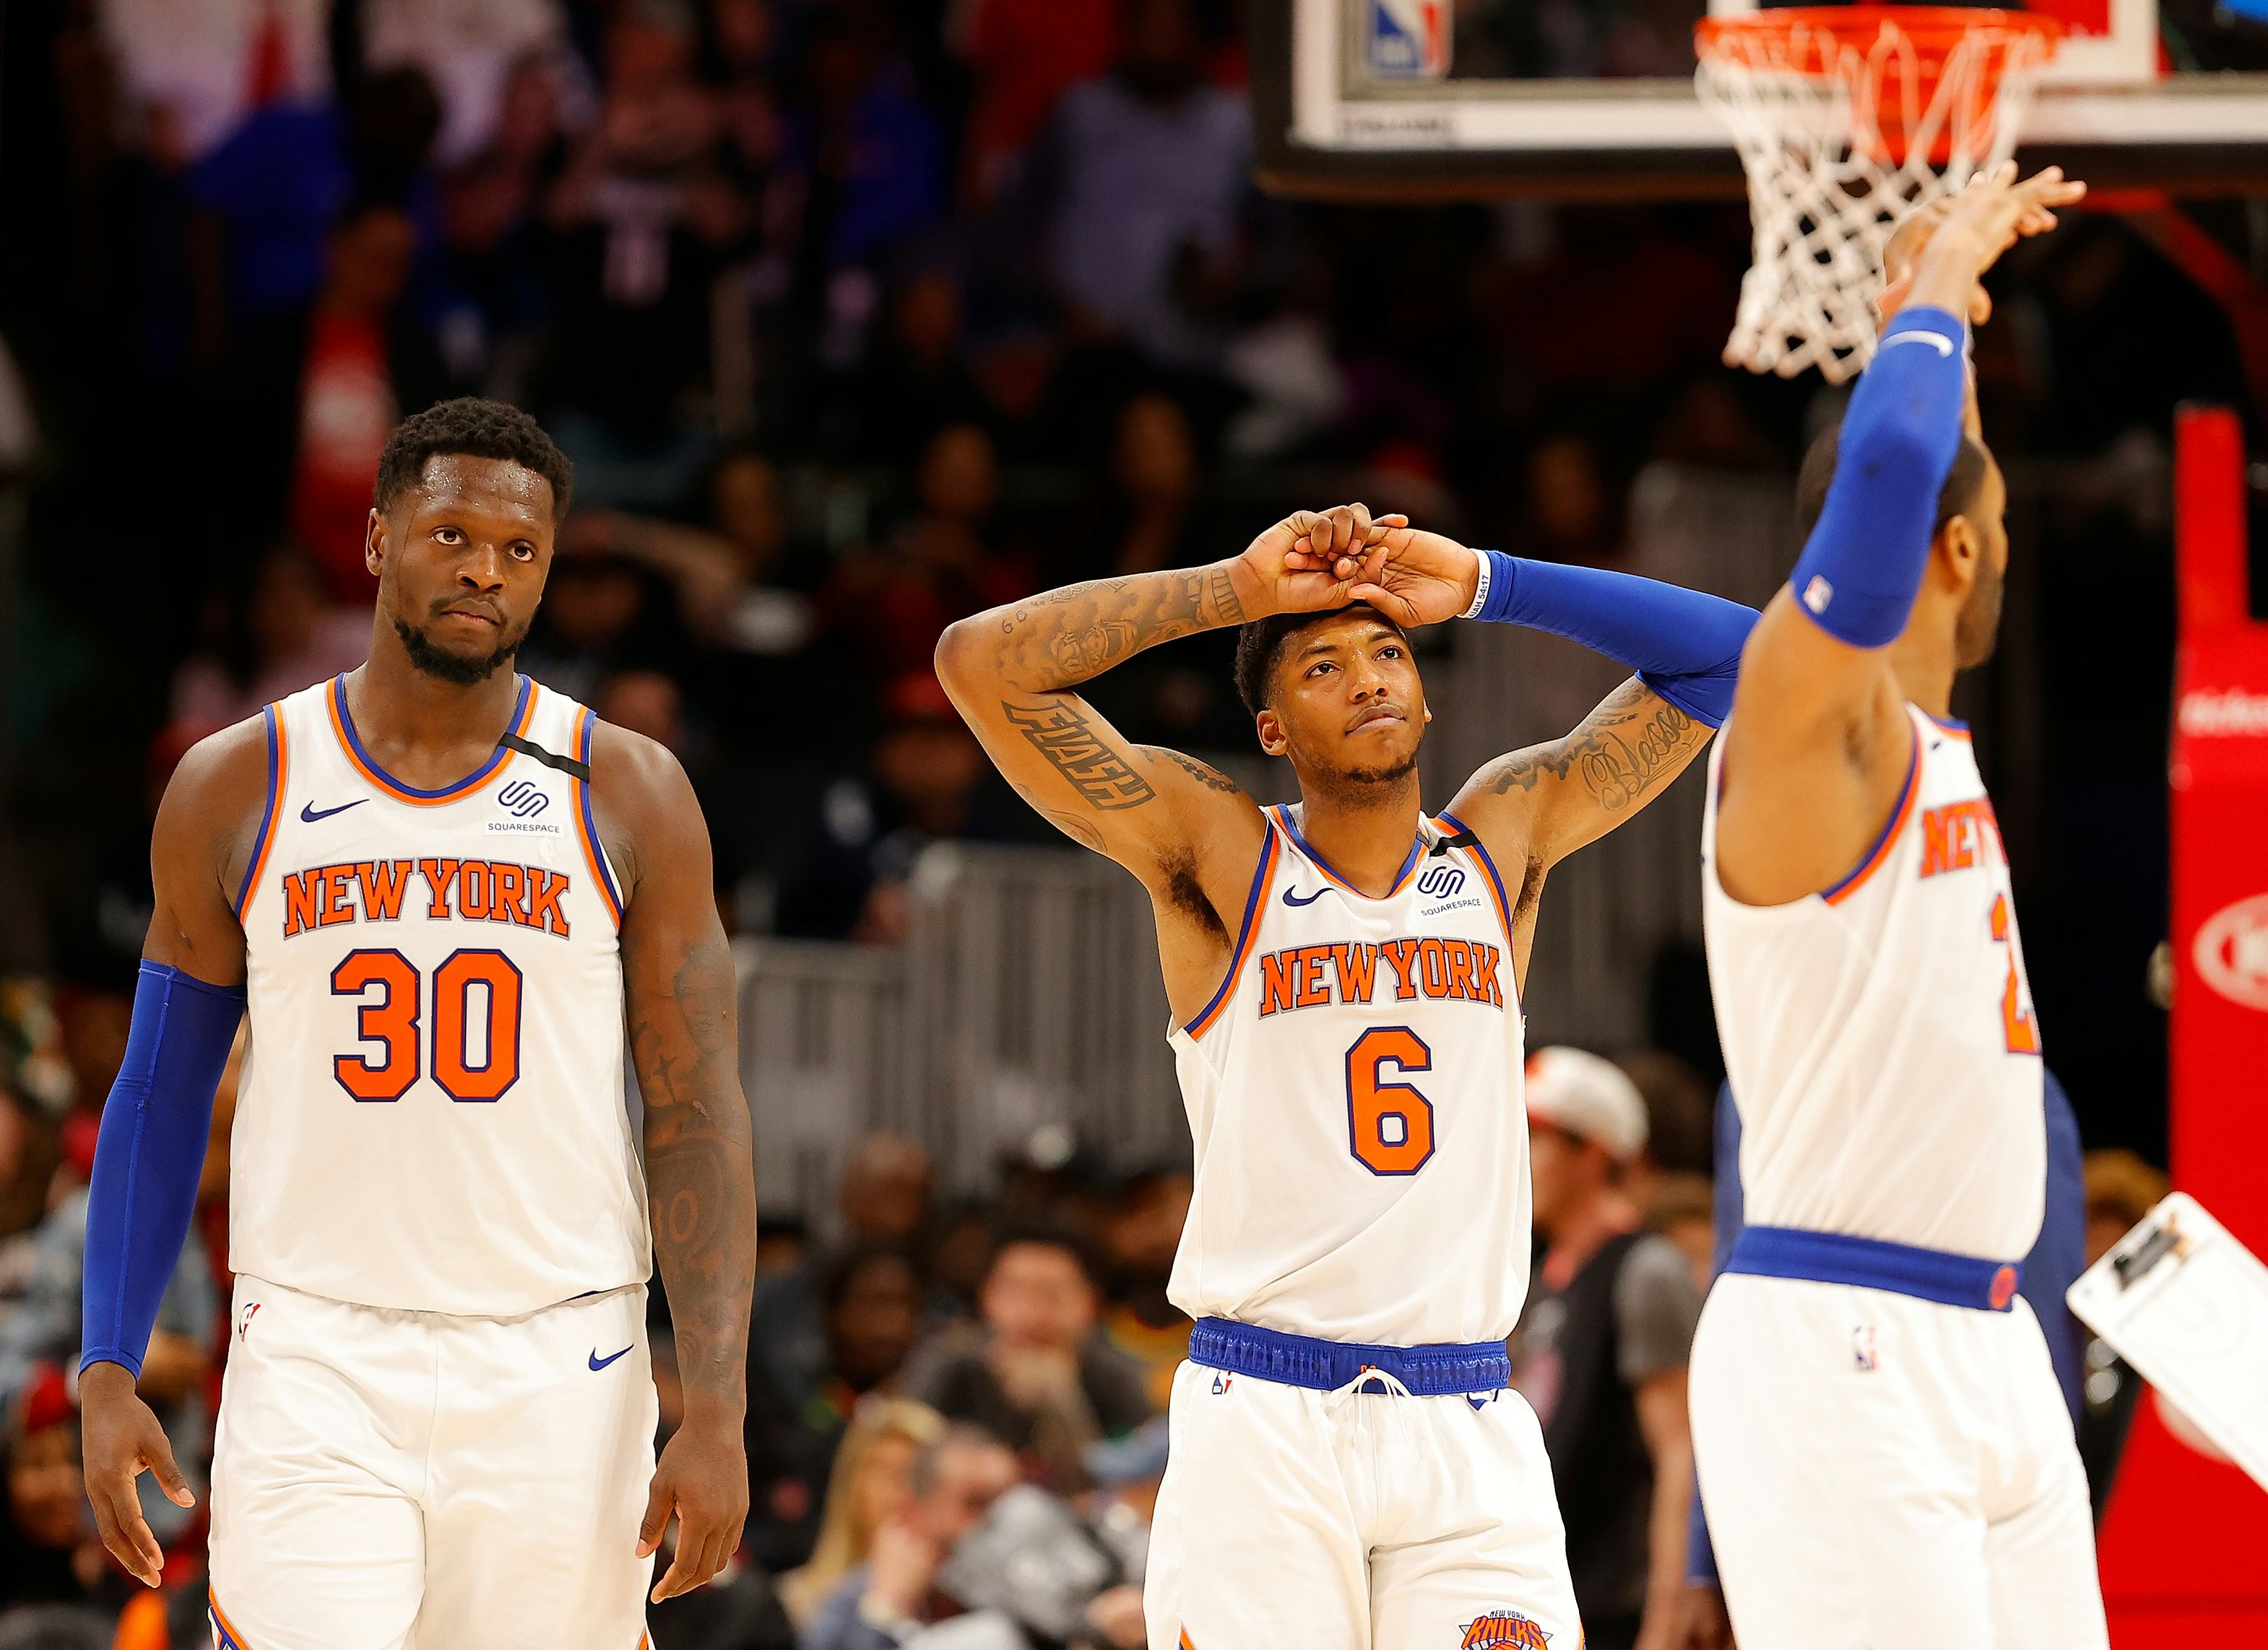 Opinion: Who are the New York Knicks? - ABC7 New York